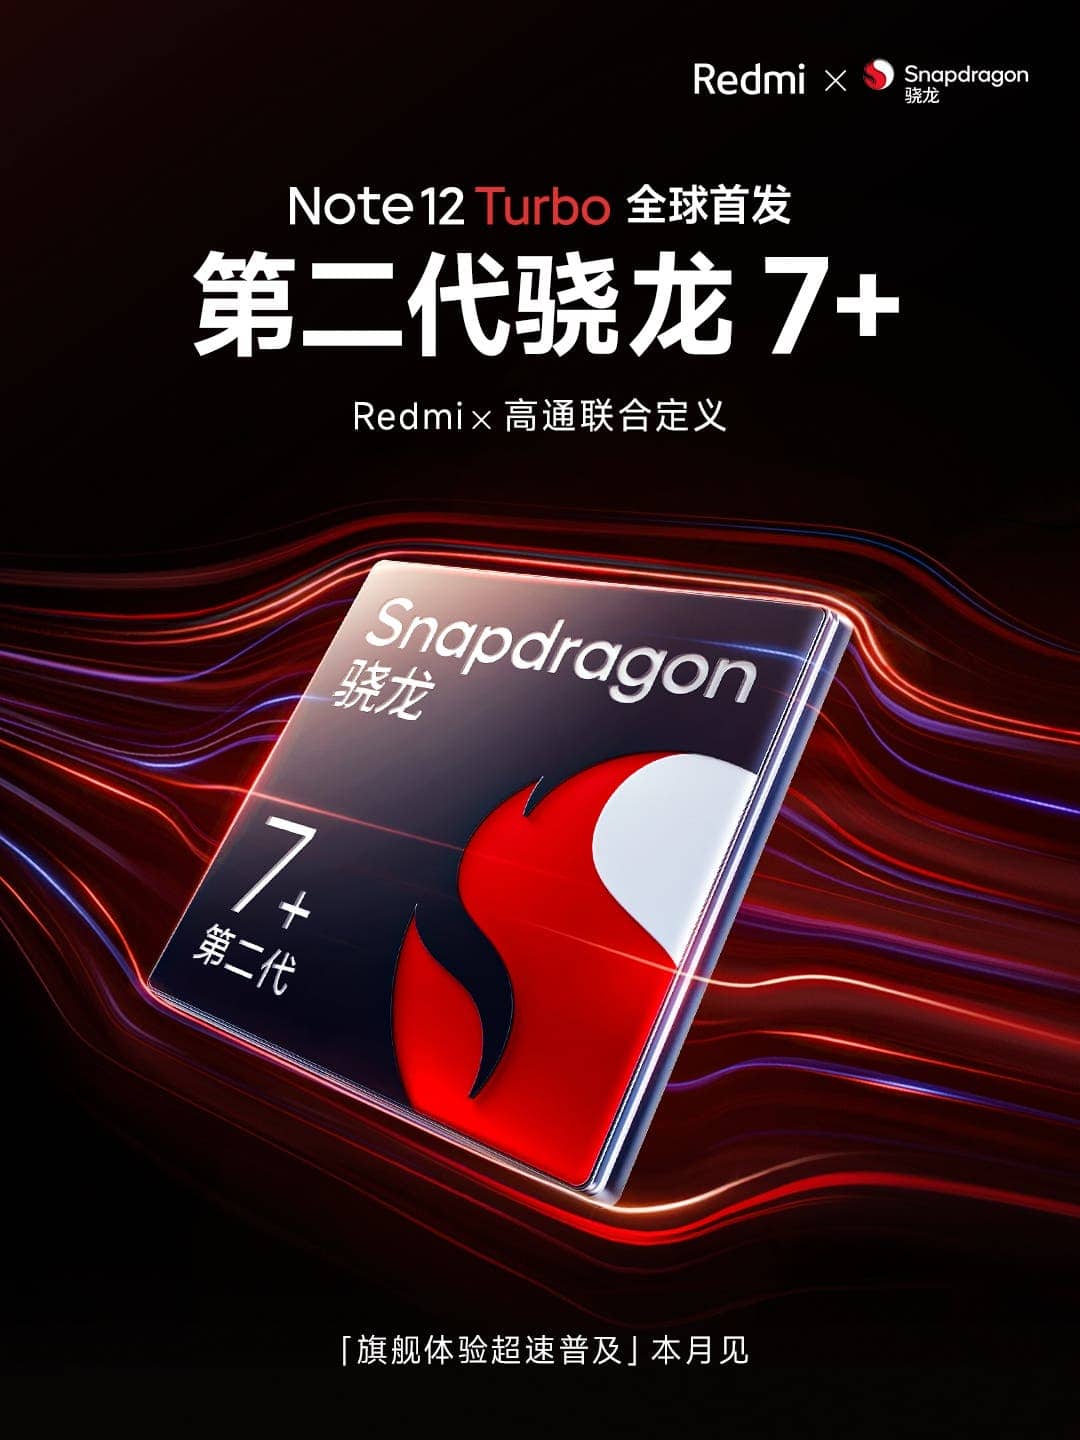 Redmi Note 12 Turbo will be the first to get the Snapdragon 7+ Gen 2